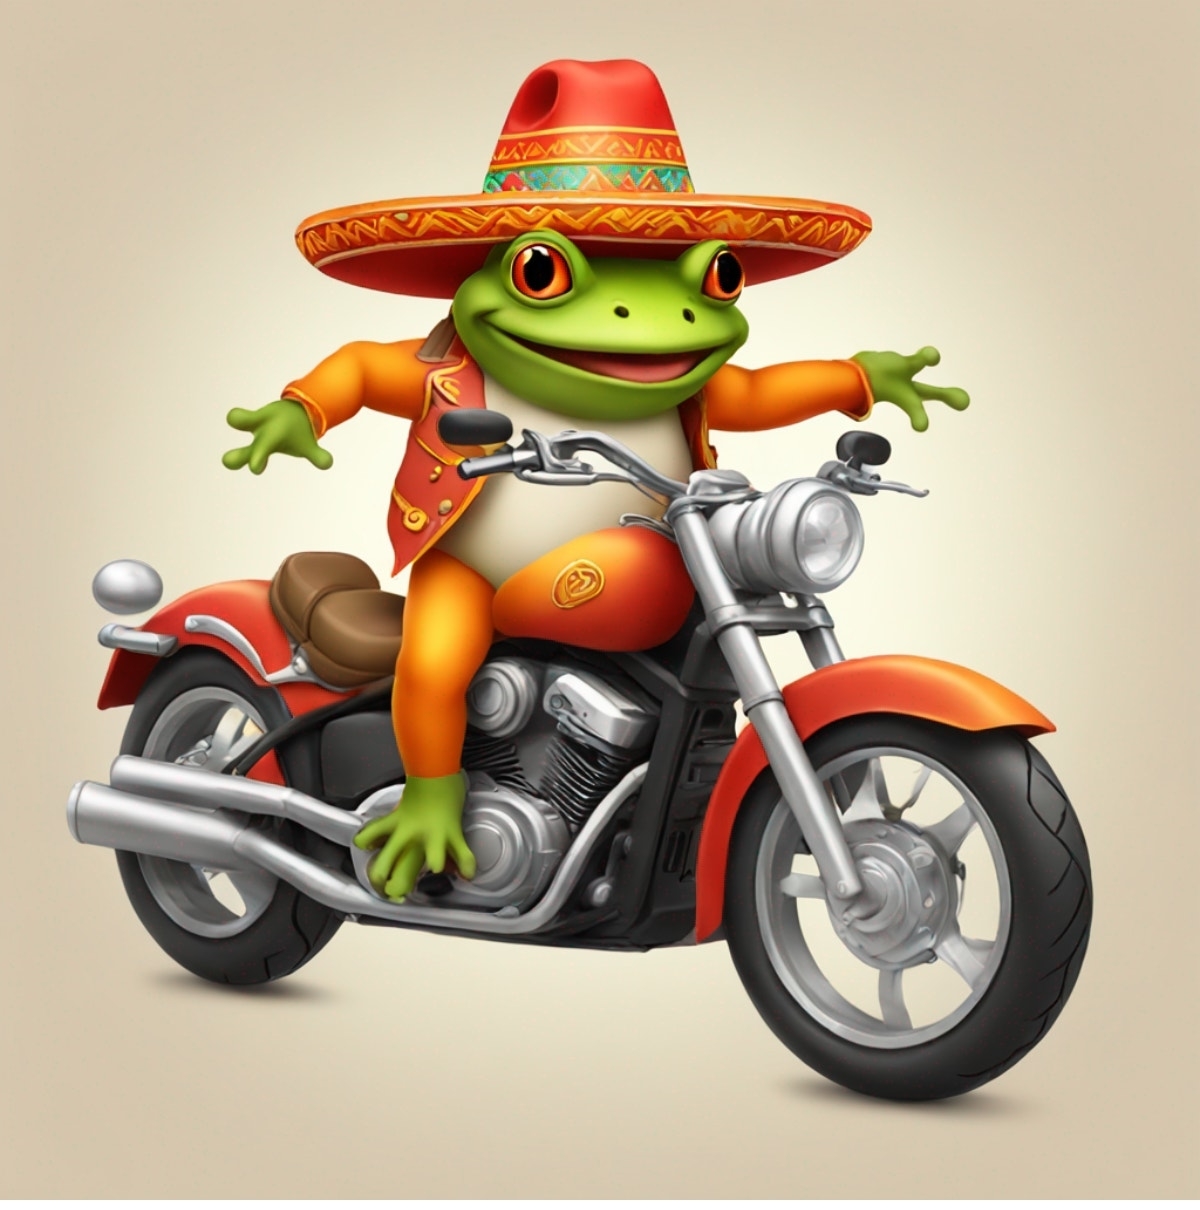 Animated frog character wearing a sombrero, riding a motorcycle